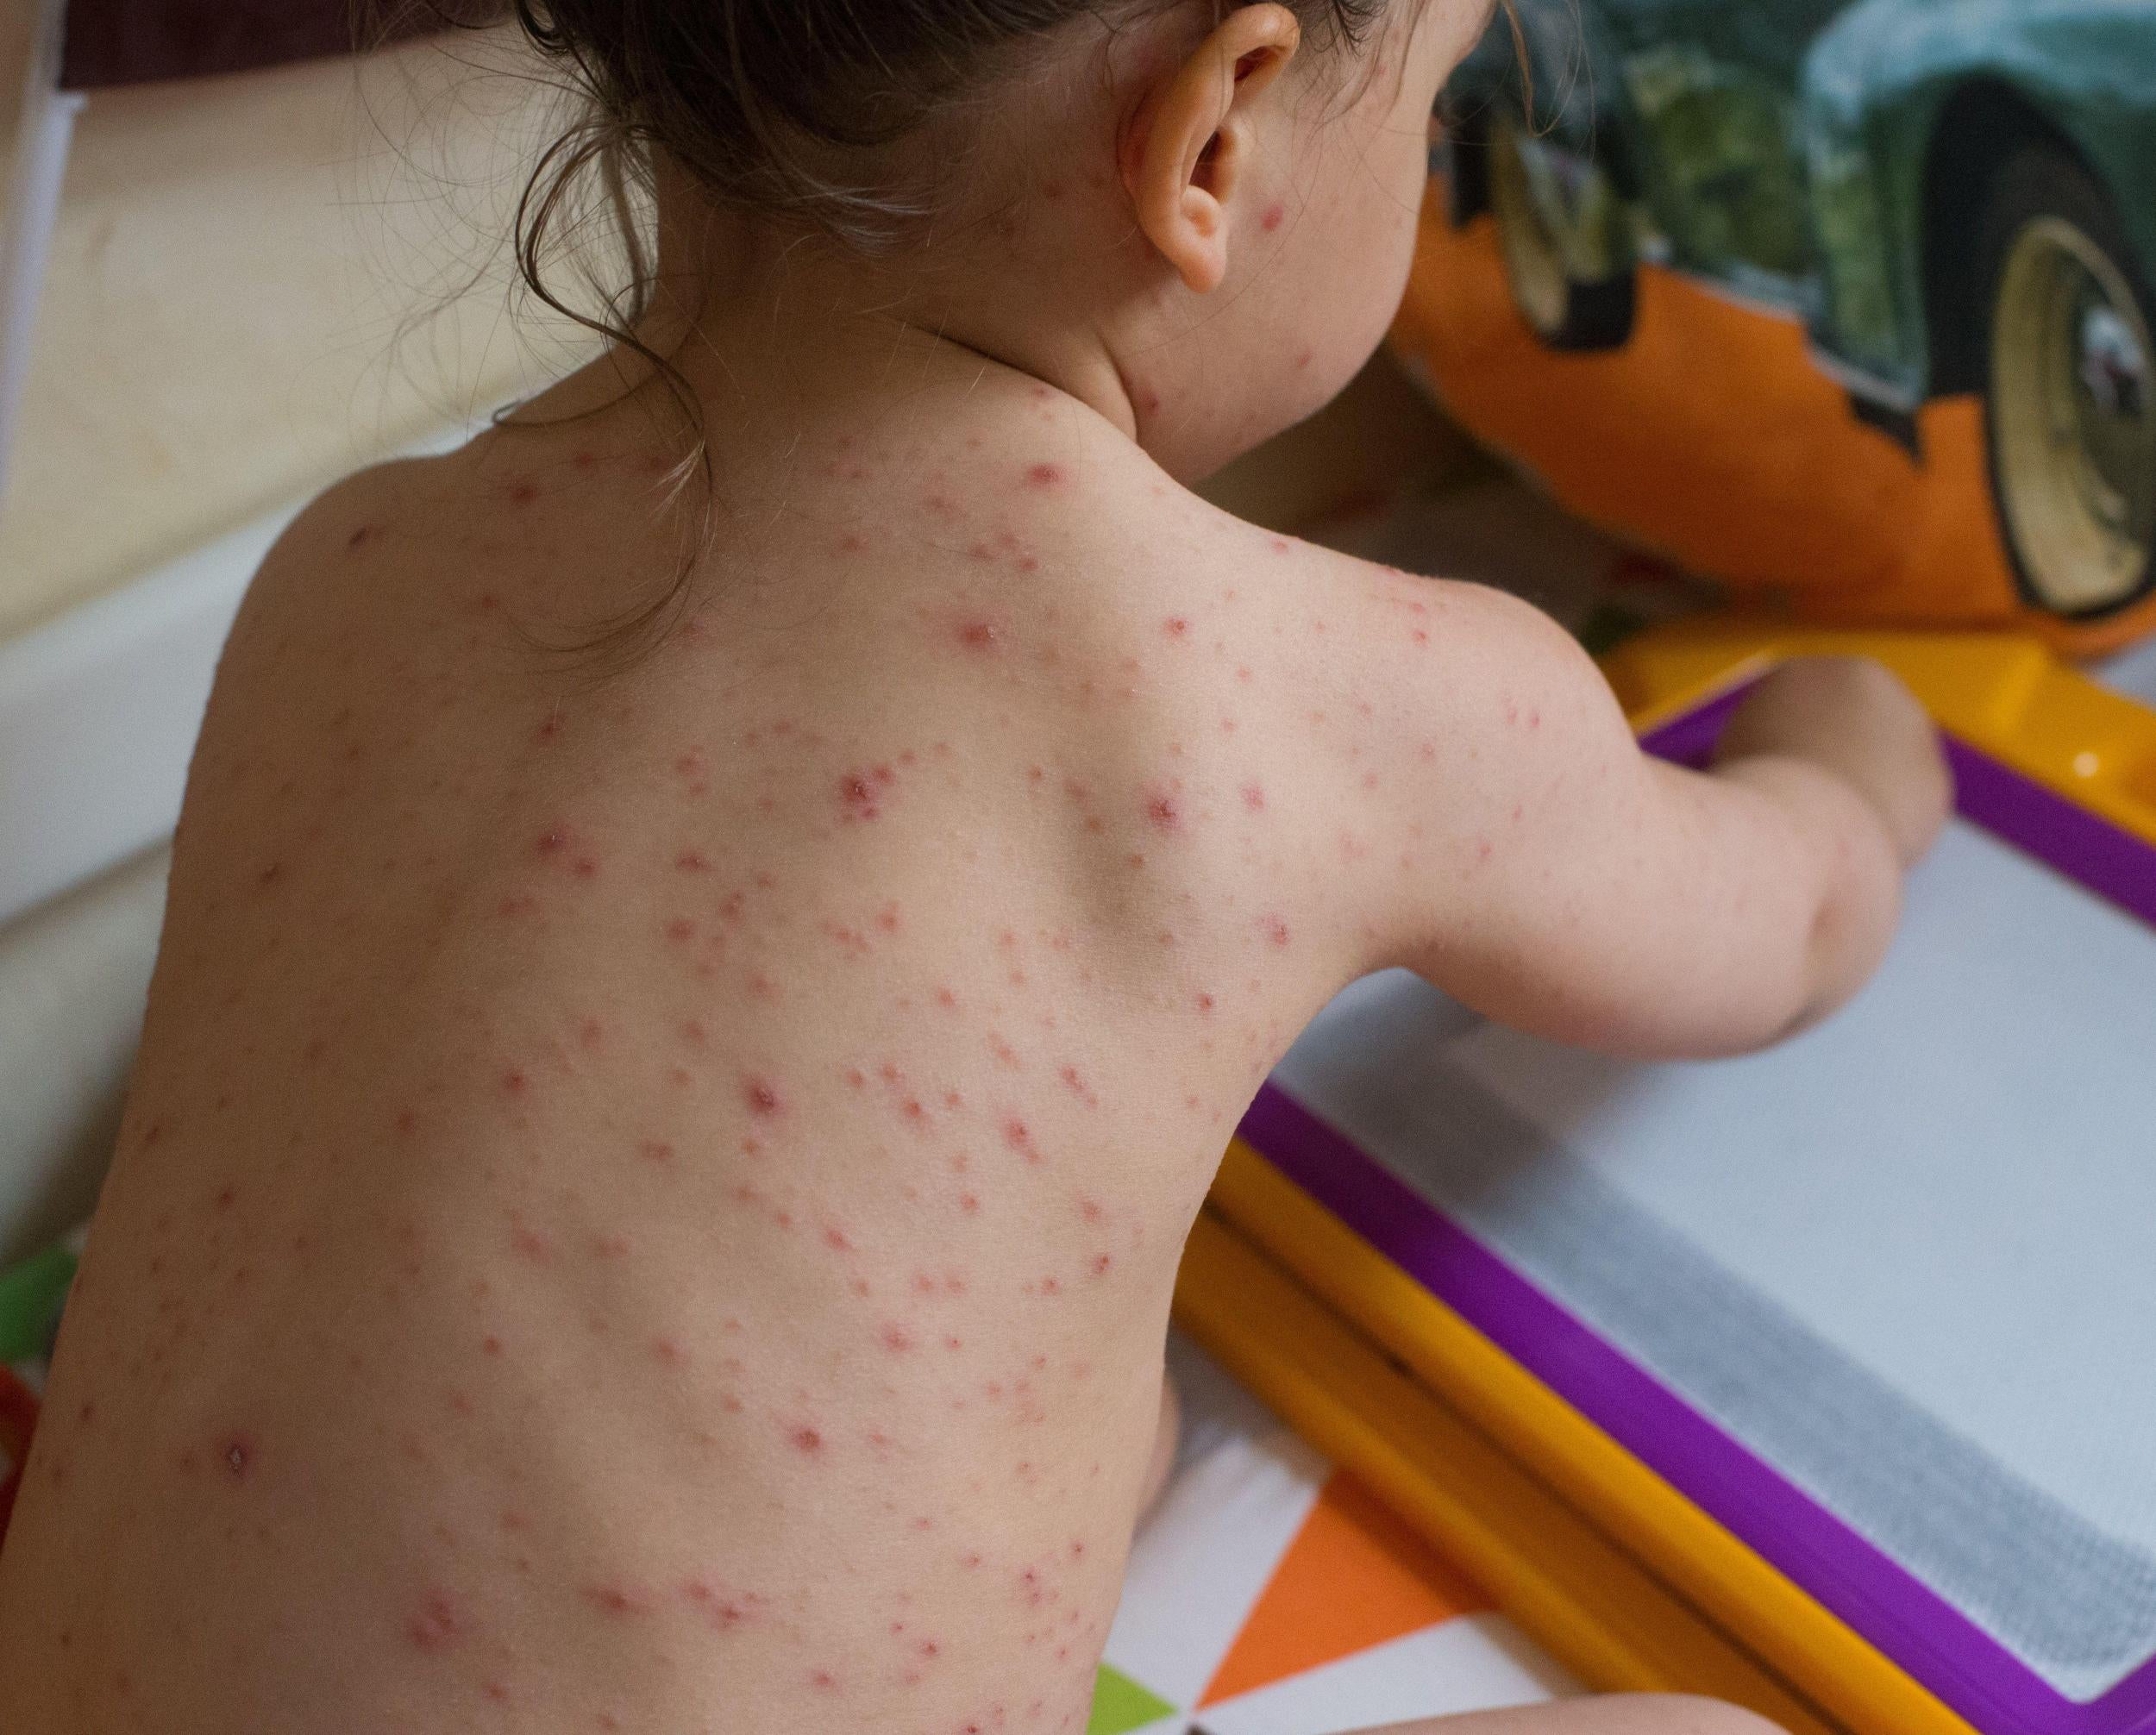 A young child suffering from chickenpox